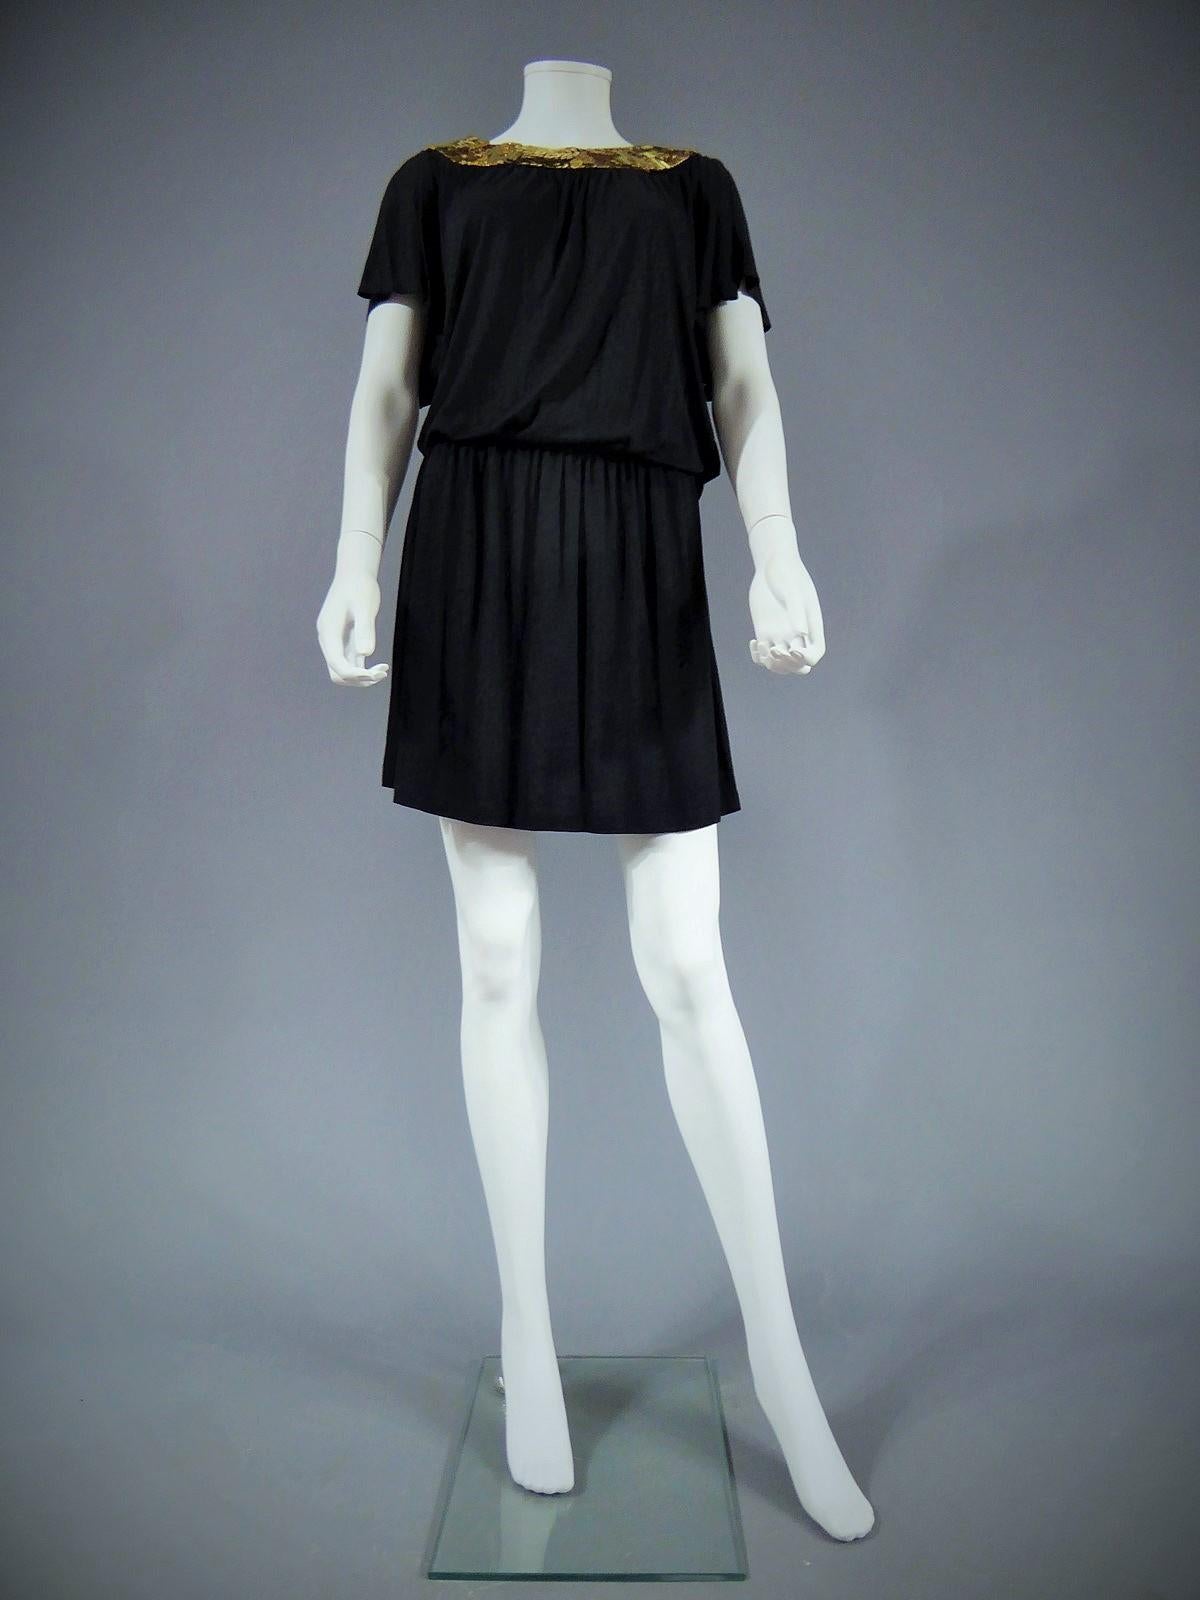 Circa 1970-1980

England.

Biba black mini dress and gold sequined collar. Opened on the back. Large and wide sleeves. Dress composed of a large t-shirt and a mini skirt, belt tight at waist. Zip closure on the skirt. Coton jersey. Biba was an